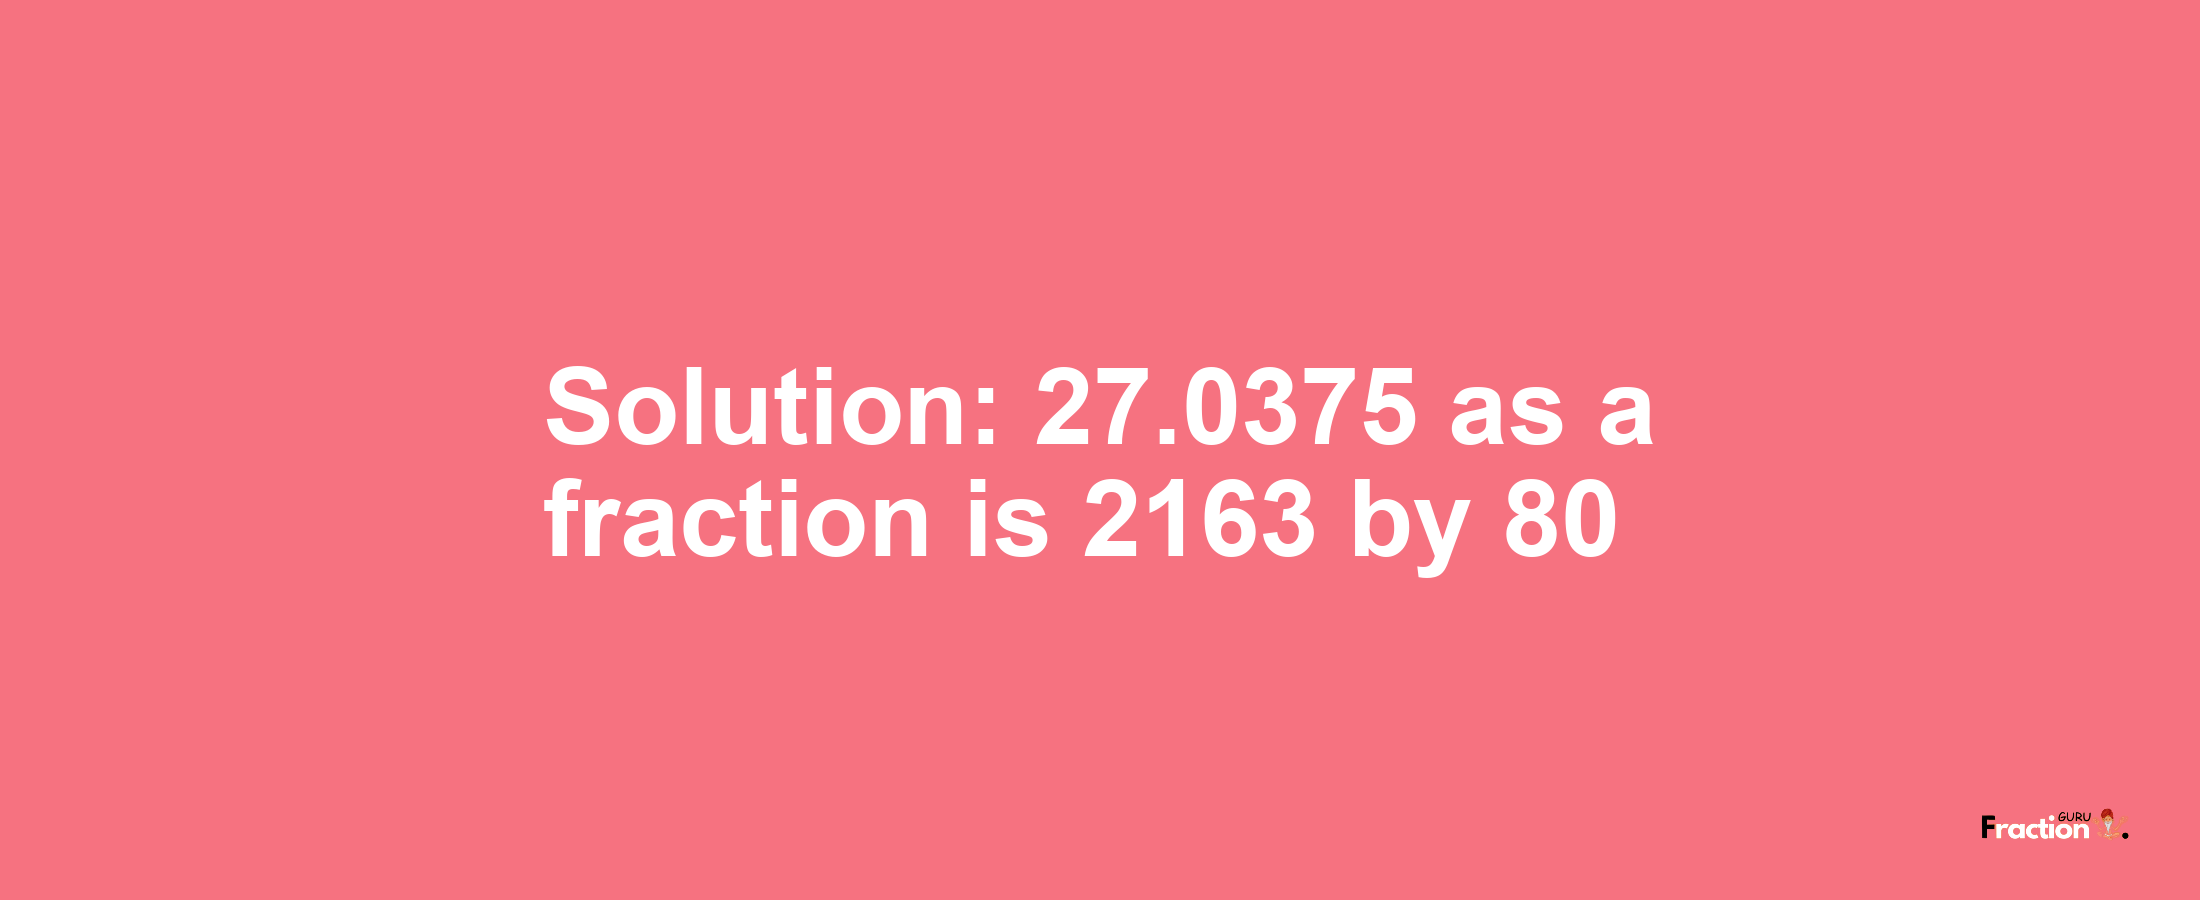 Solution:27.0375 as a fraction is 2163/80